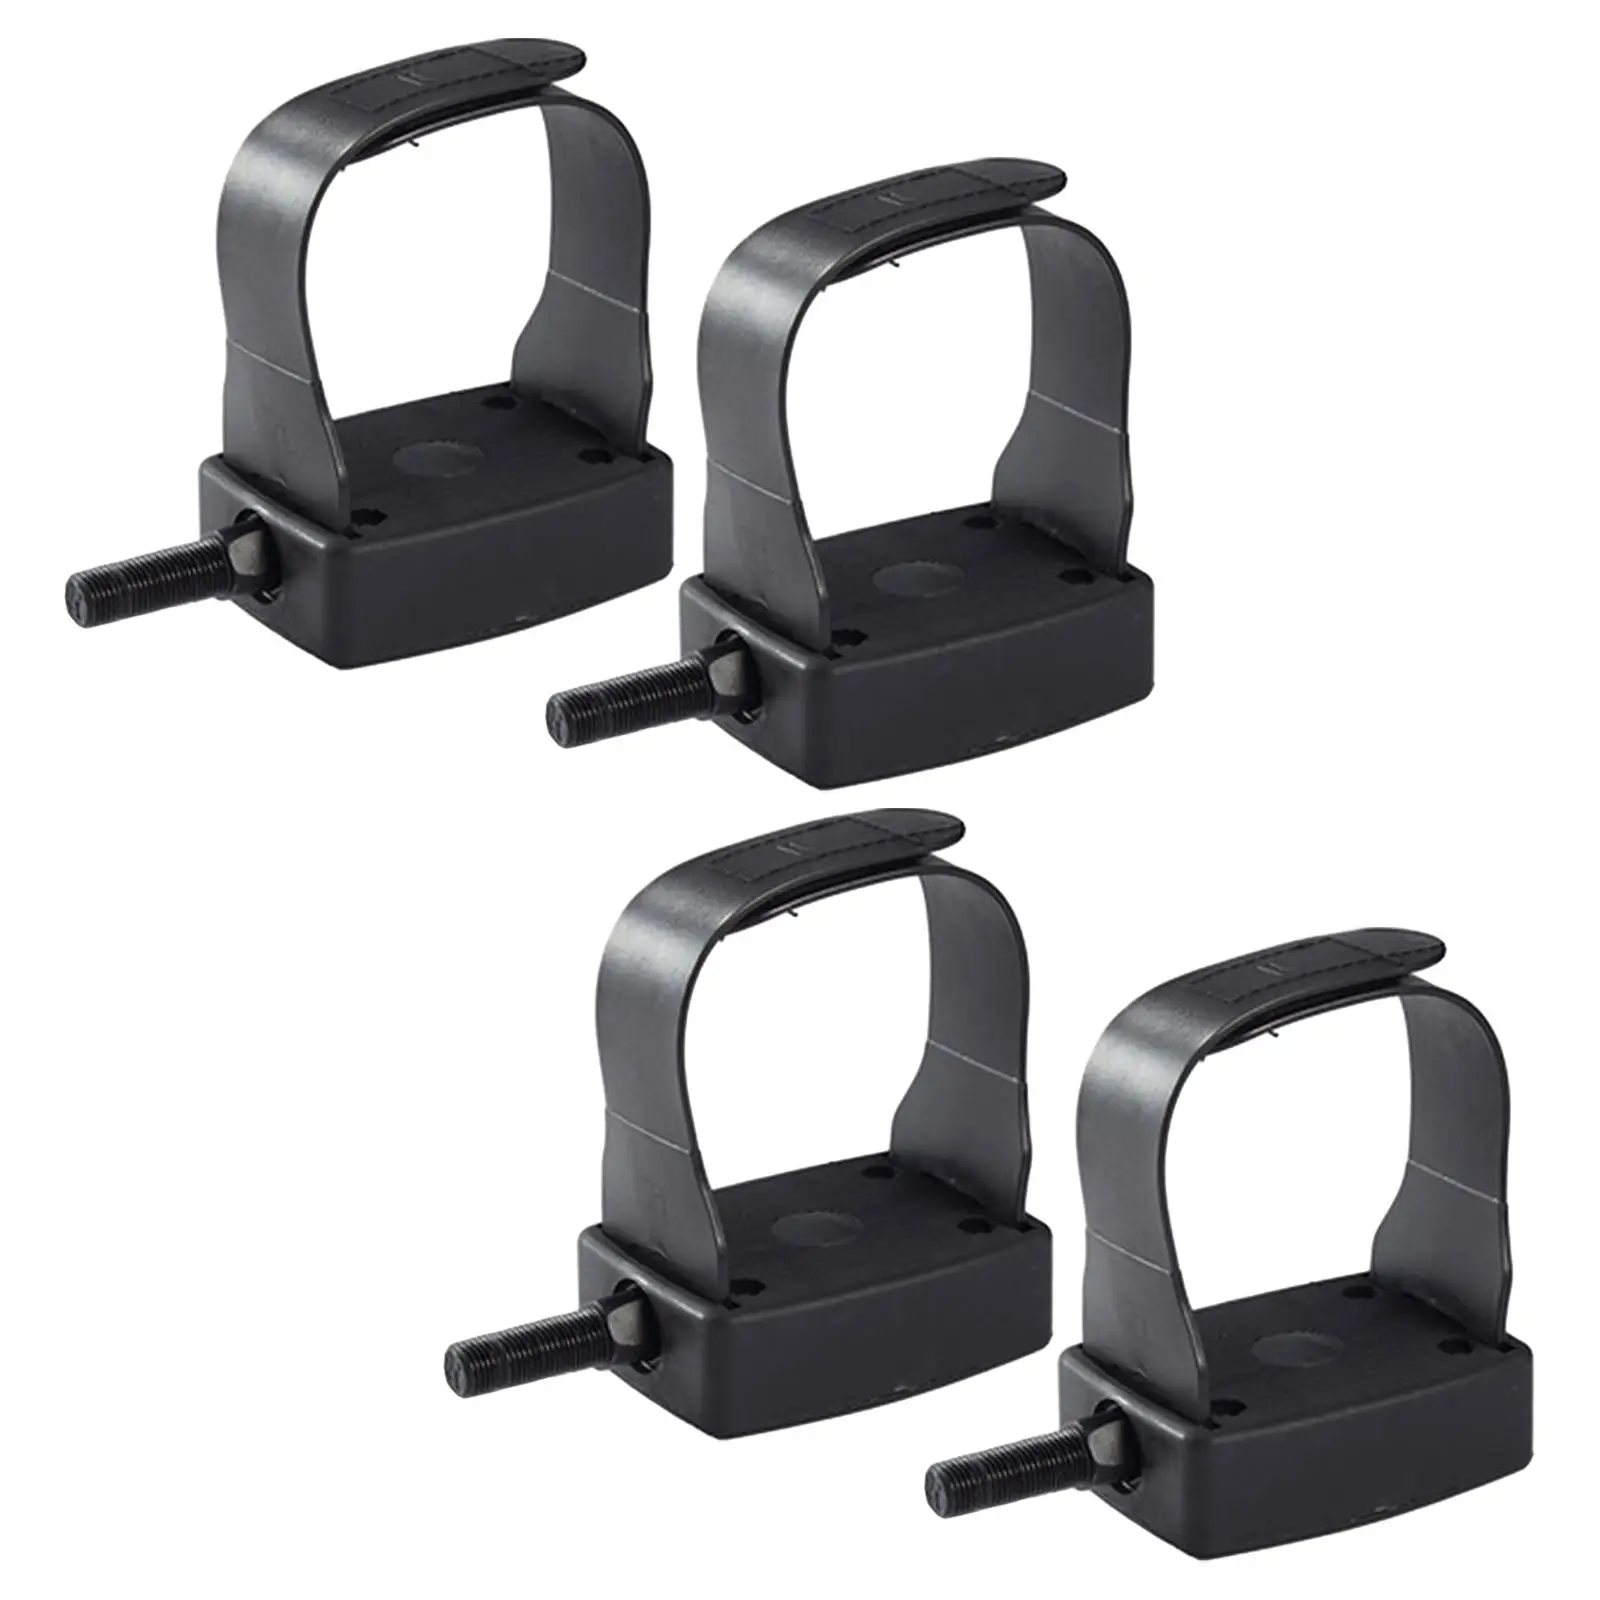 1 Pair Simple to Install Universal Exercise Bike Pedals for Riding Bike Commute